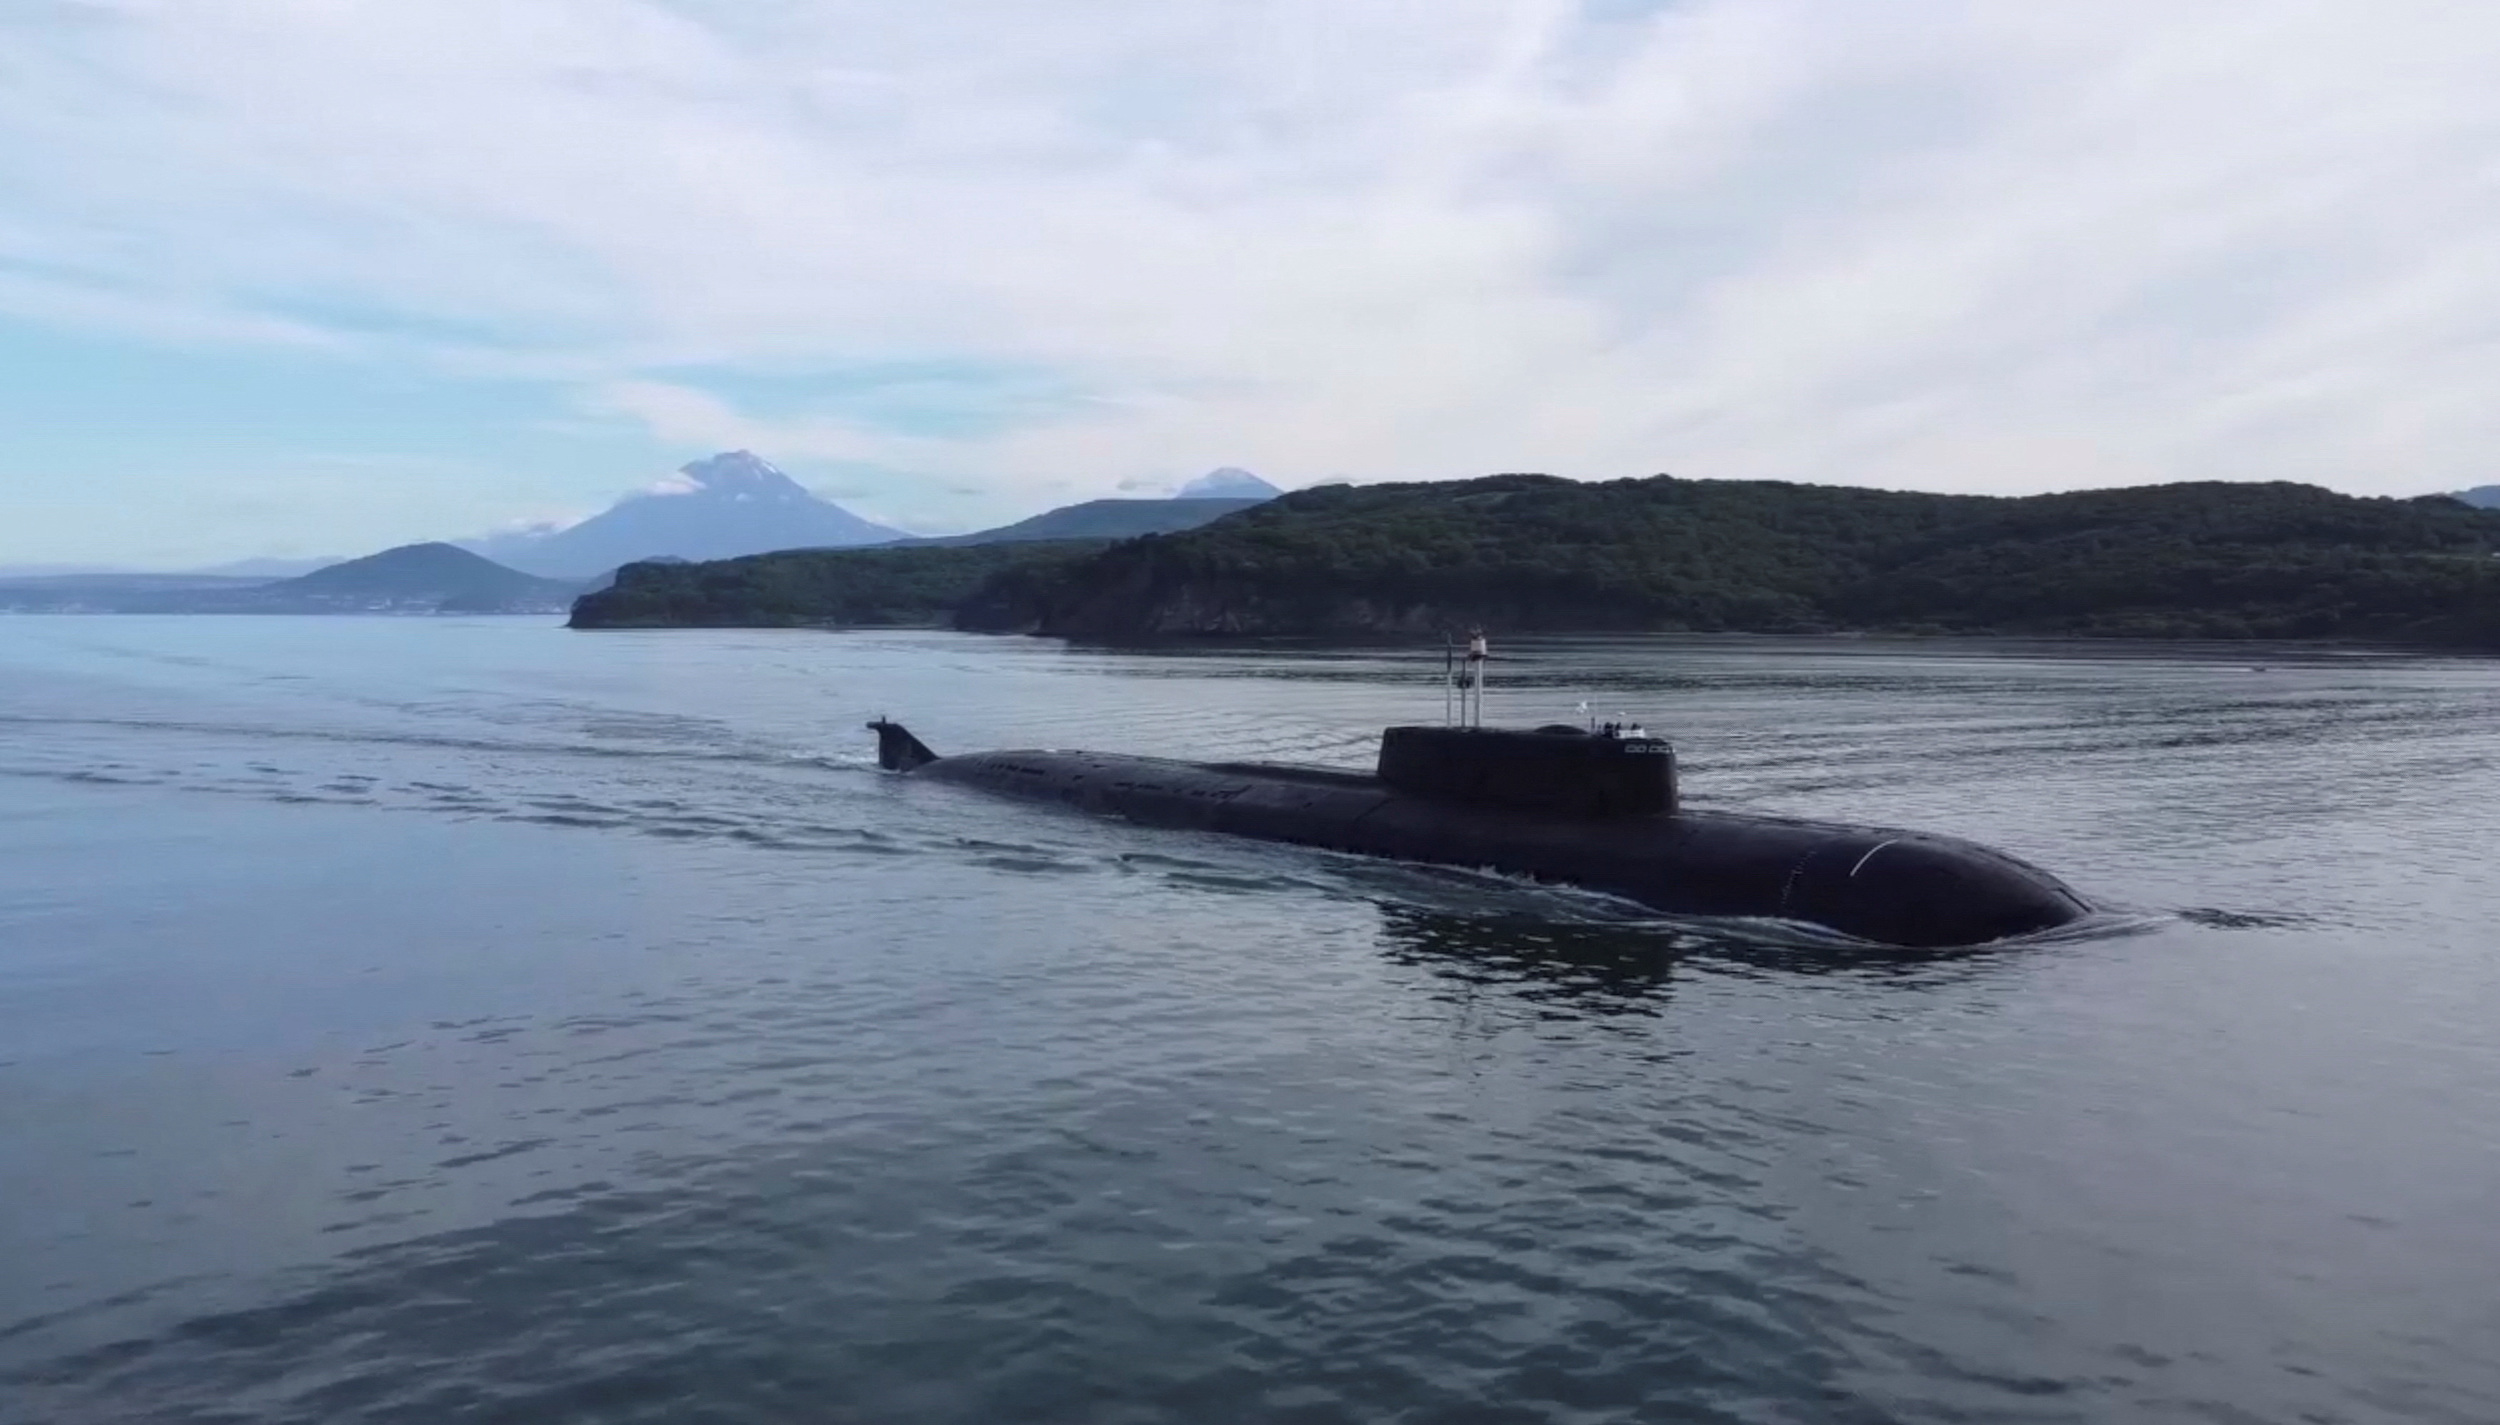 A still image from a video released by the Russian Defense Ministry shows a Russian nuclear-powered submarine sailing during the military drill in the Chukchi Sea on September 16.